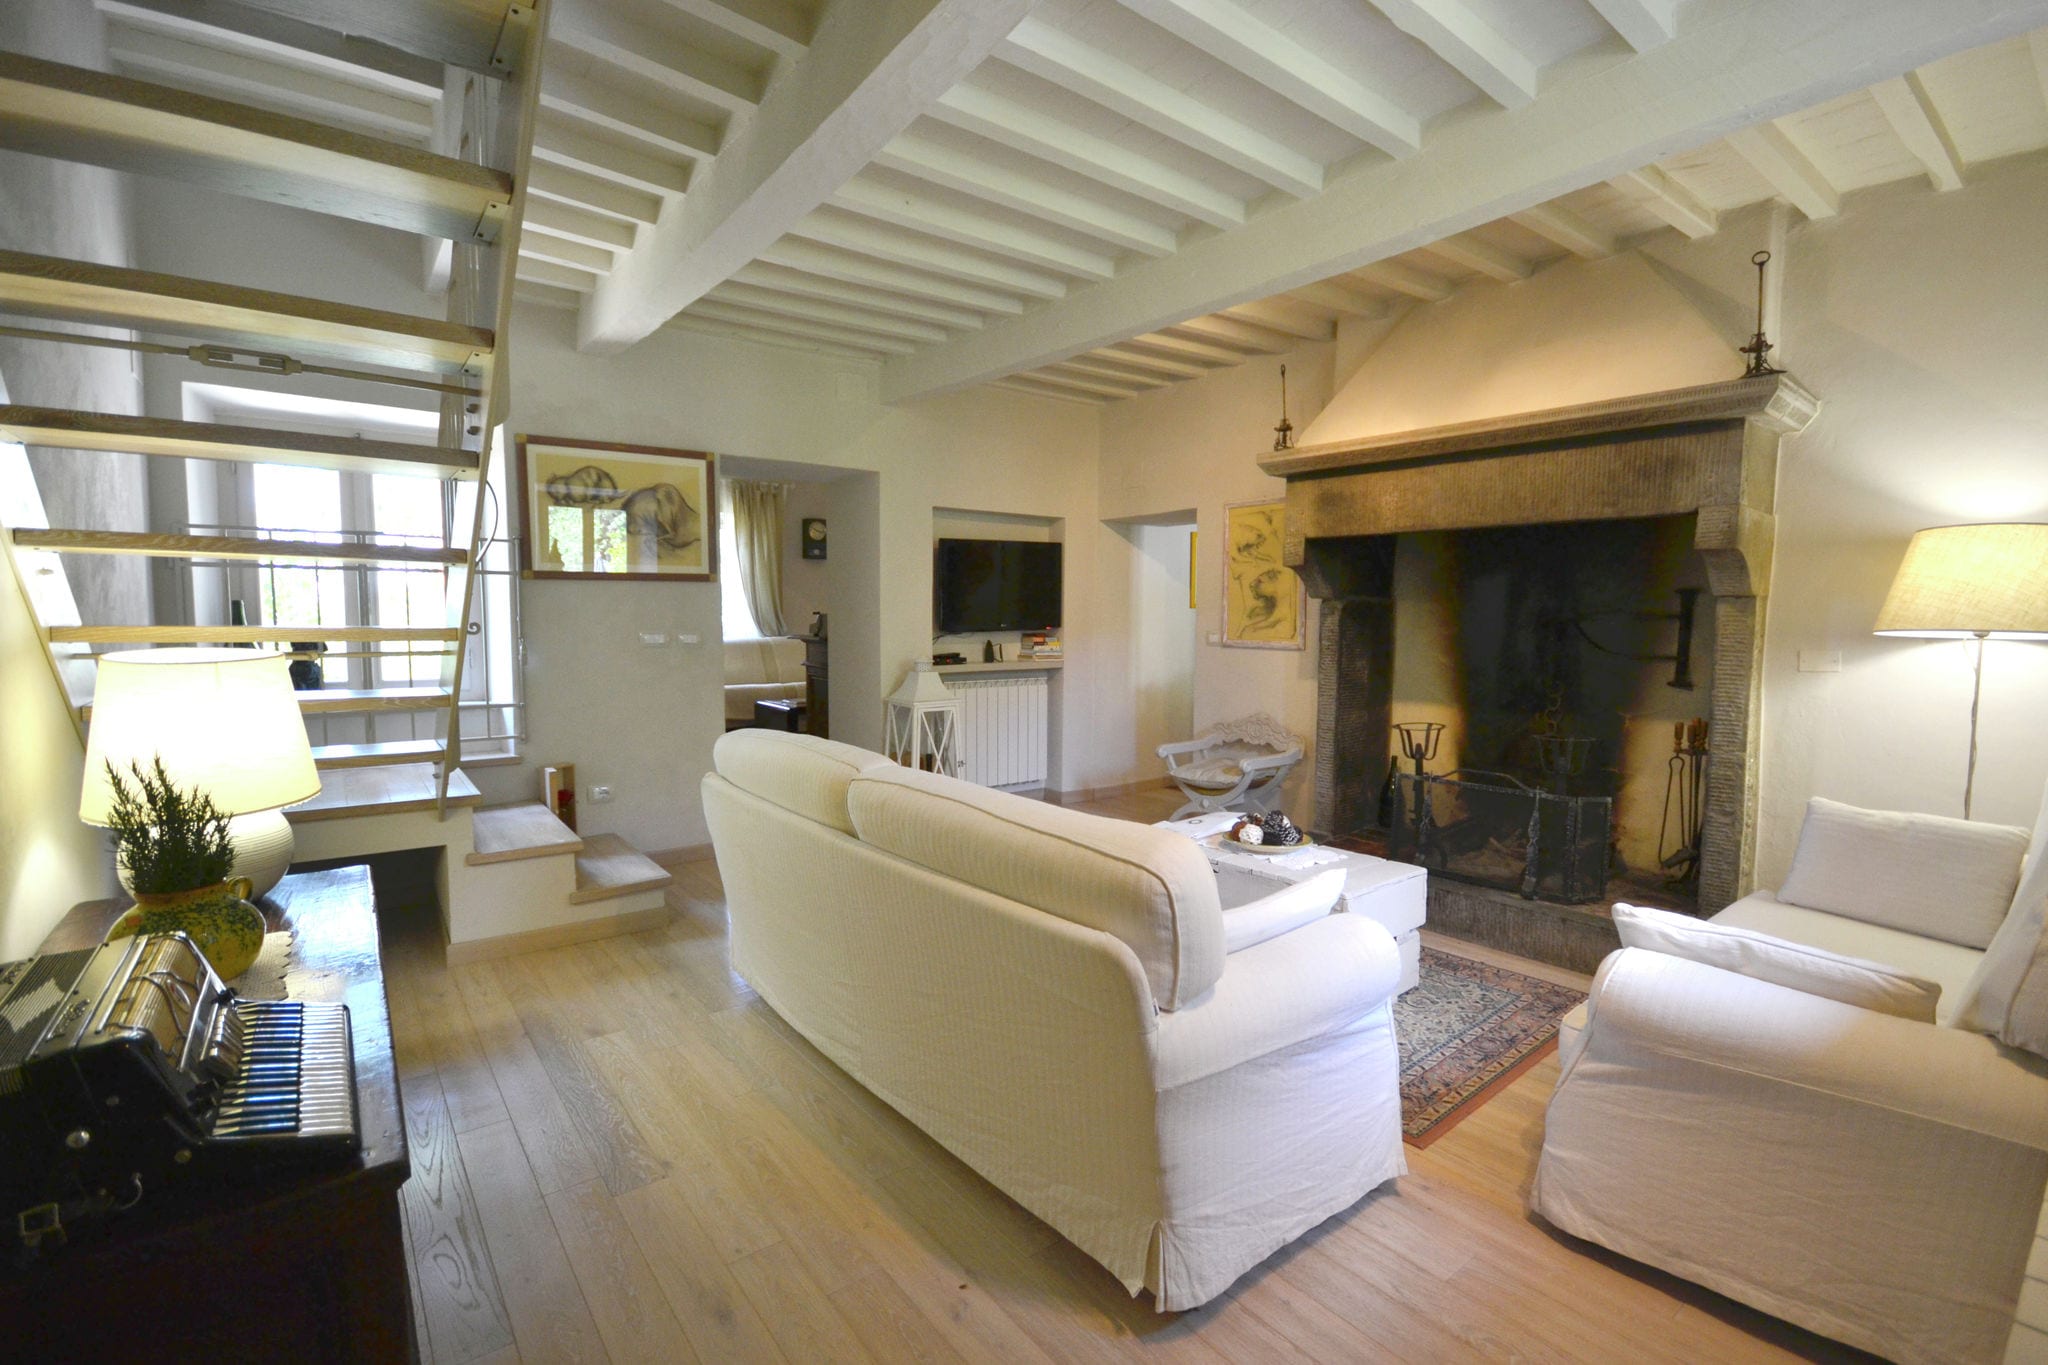 Nice villa with private pool, large garden, lots of privacy and close to Cortona